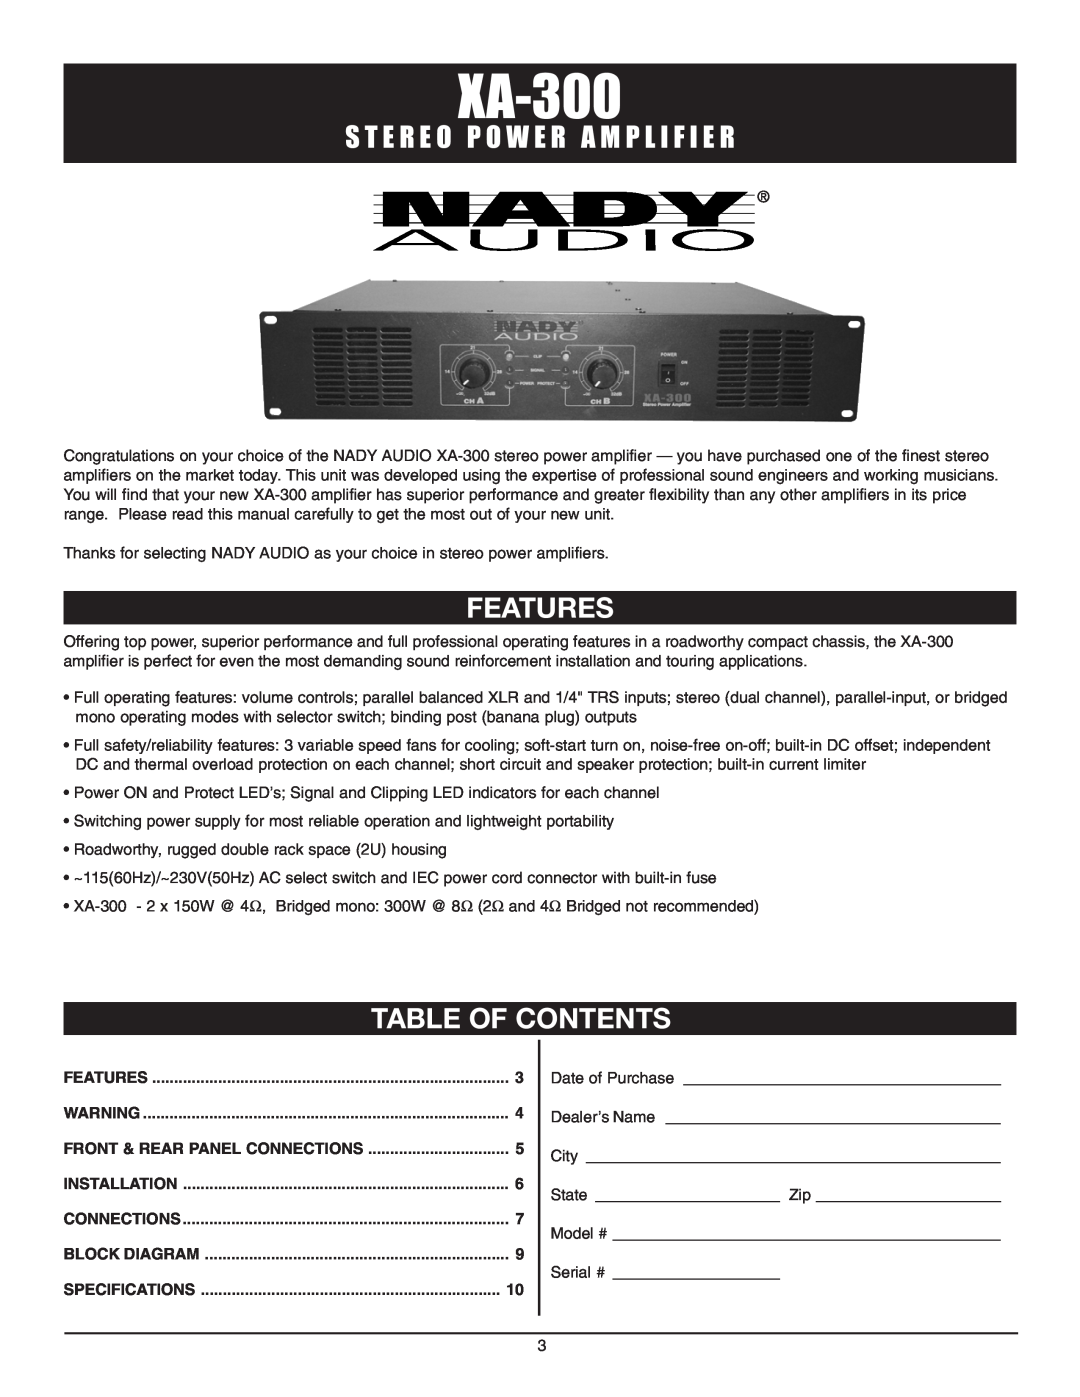 Nady Systems XA-300 Features, Table Of Contents, S T E R E O P O W E R A M P L I F I E R, Front & Rear Panel Connections 